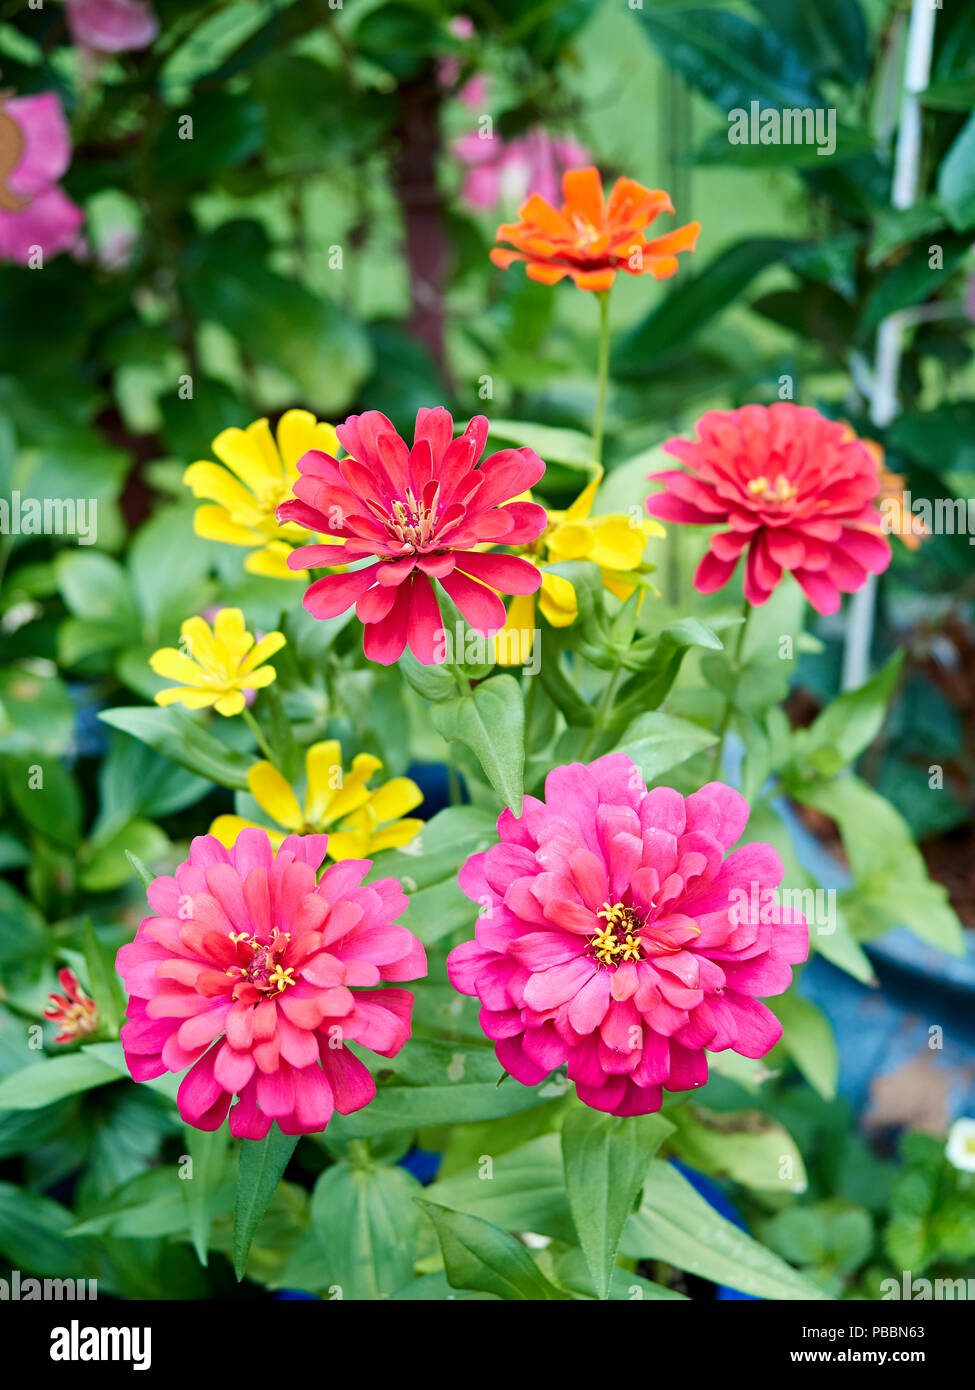 Close up of colorful zinnias or, zinnia flowers, in a patio garden with colors of red, pink and yellow. Stock Photo